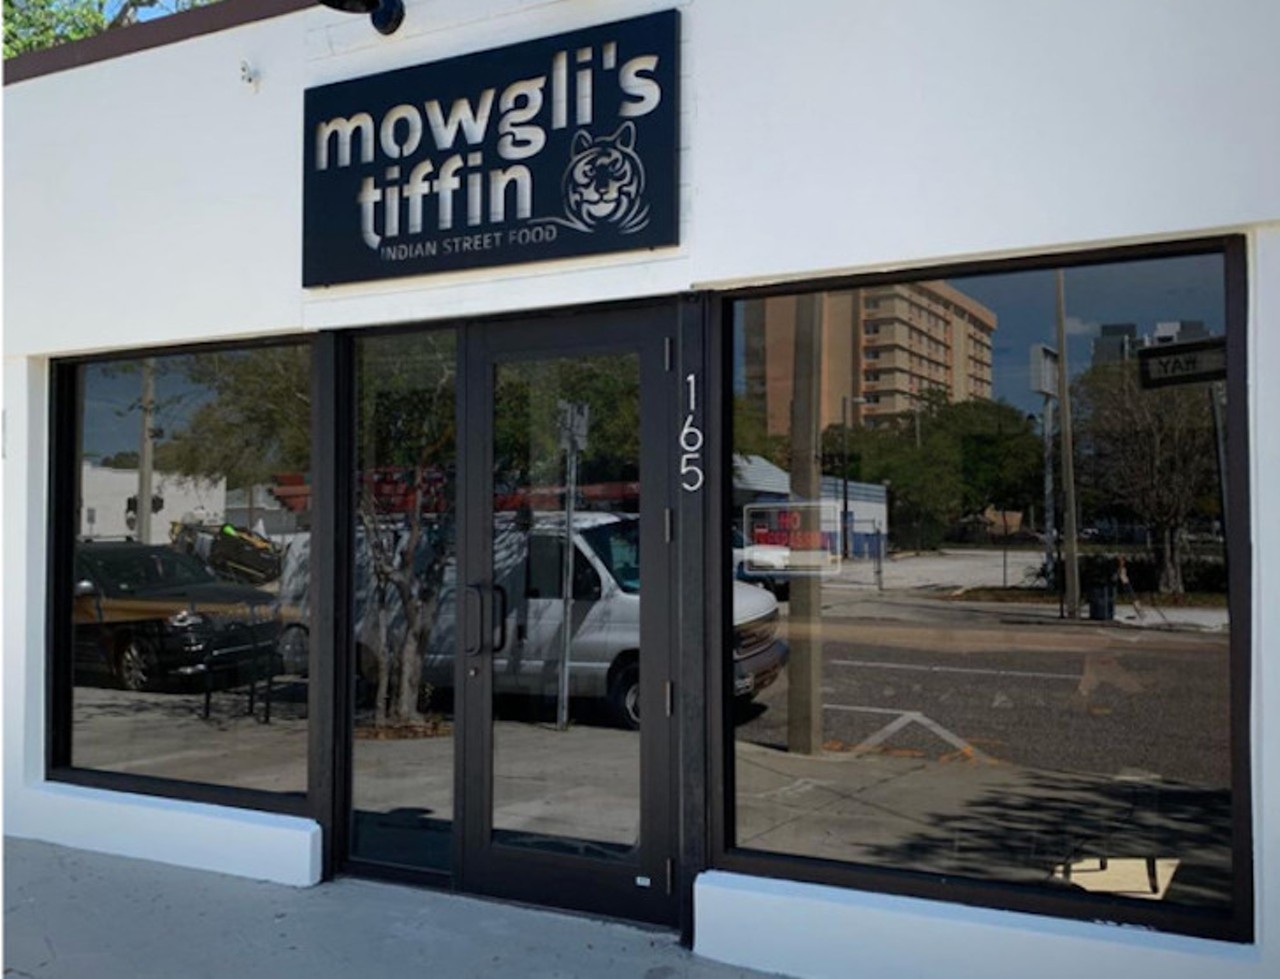 Mowgli&#146;s Tiffin
165 Dr. MLK St. N., St. Petersburg
Owner and Tampa Bay native, Amita Mukherjee, told CL that the concept is inspired by her frequent trips to India with her parents in her early years, which helped blossom a love for Indian street food. Mukherjee calls Mowgli&#146;s Tiffin a 25-year passion project, and will base the 16 seat, 526-square-foot restaurant around a user-friendly, limited menu. As of now, the menu is still in the works, but Mukherjee says the signature item is a play on the traditional kati roll, which she calls Kolkati Roll - think roti wrapped around a kebab. 
Photo via Hot_Metal_Designs